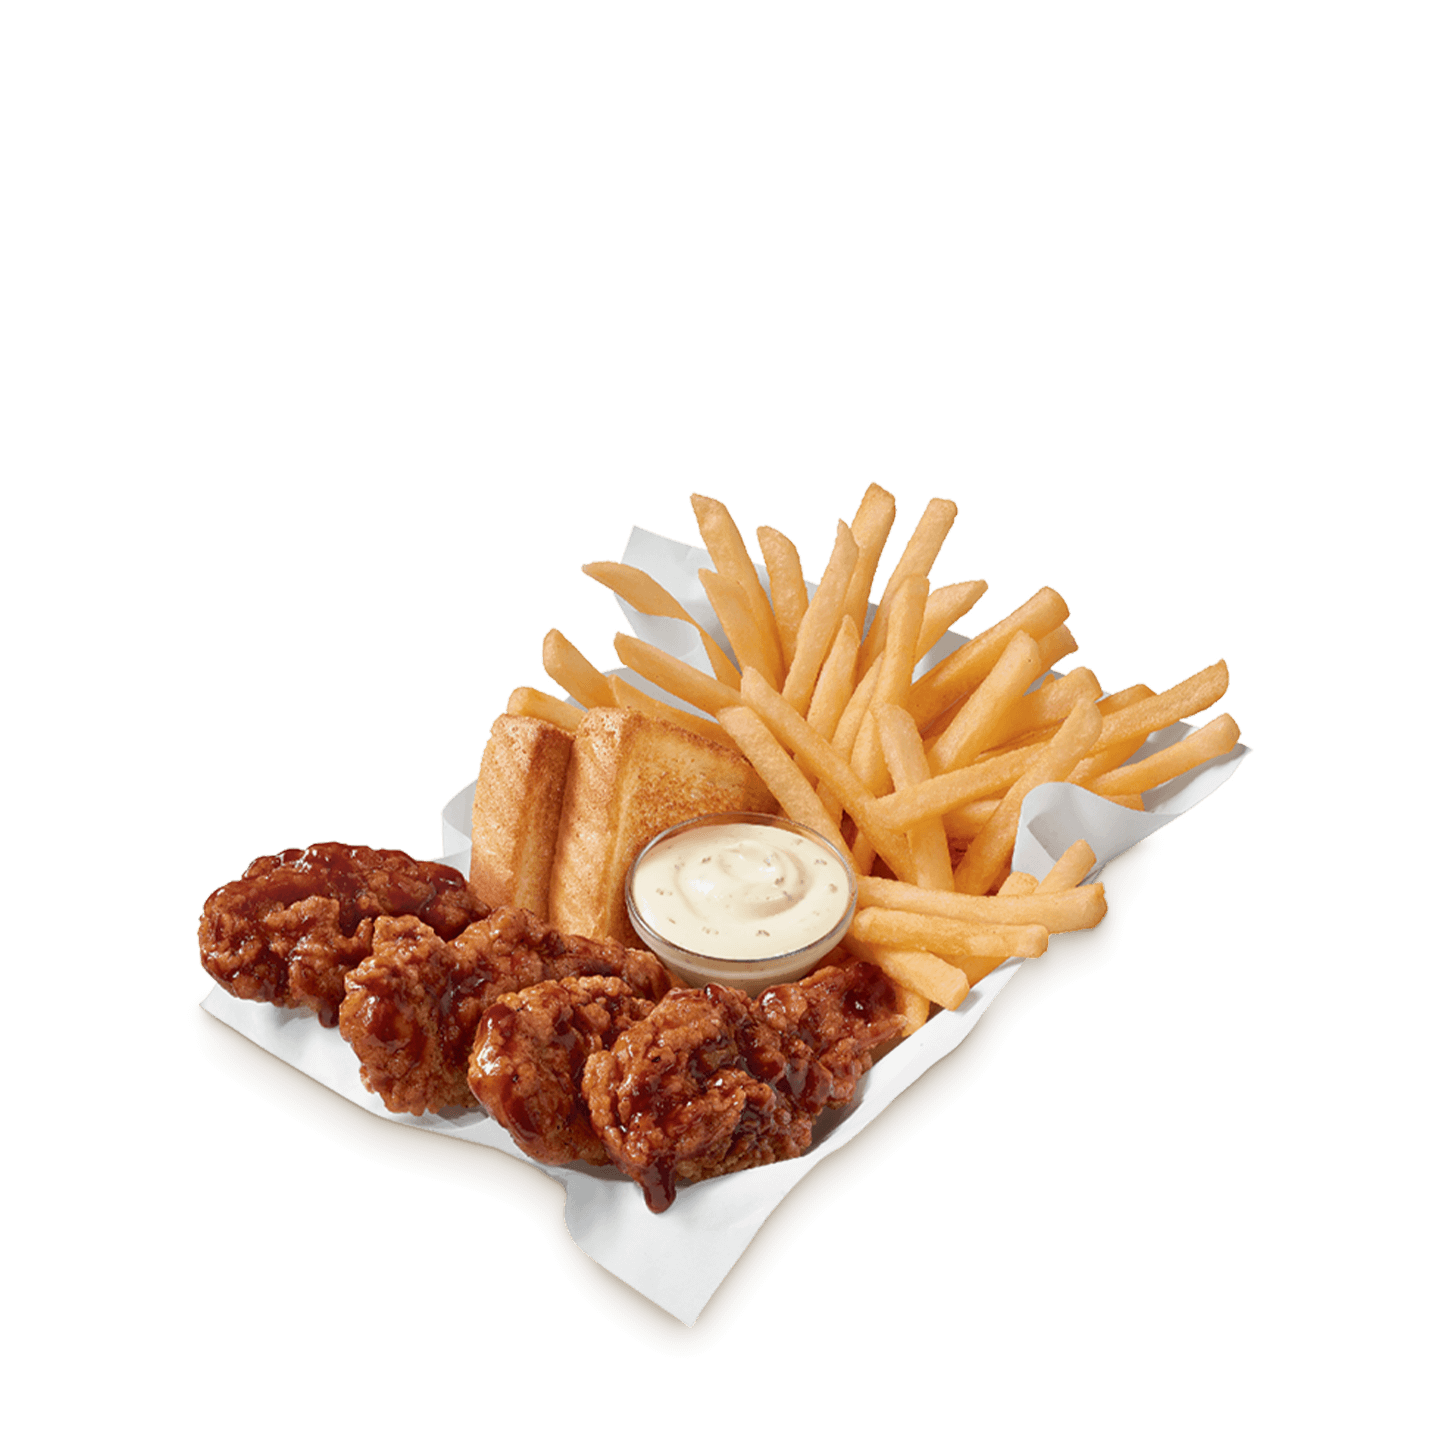 Honey BBQ chicken strips with fries, toast and dipping sauce